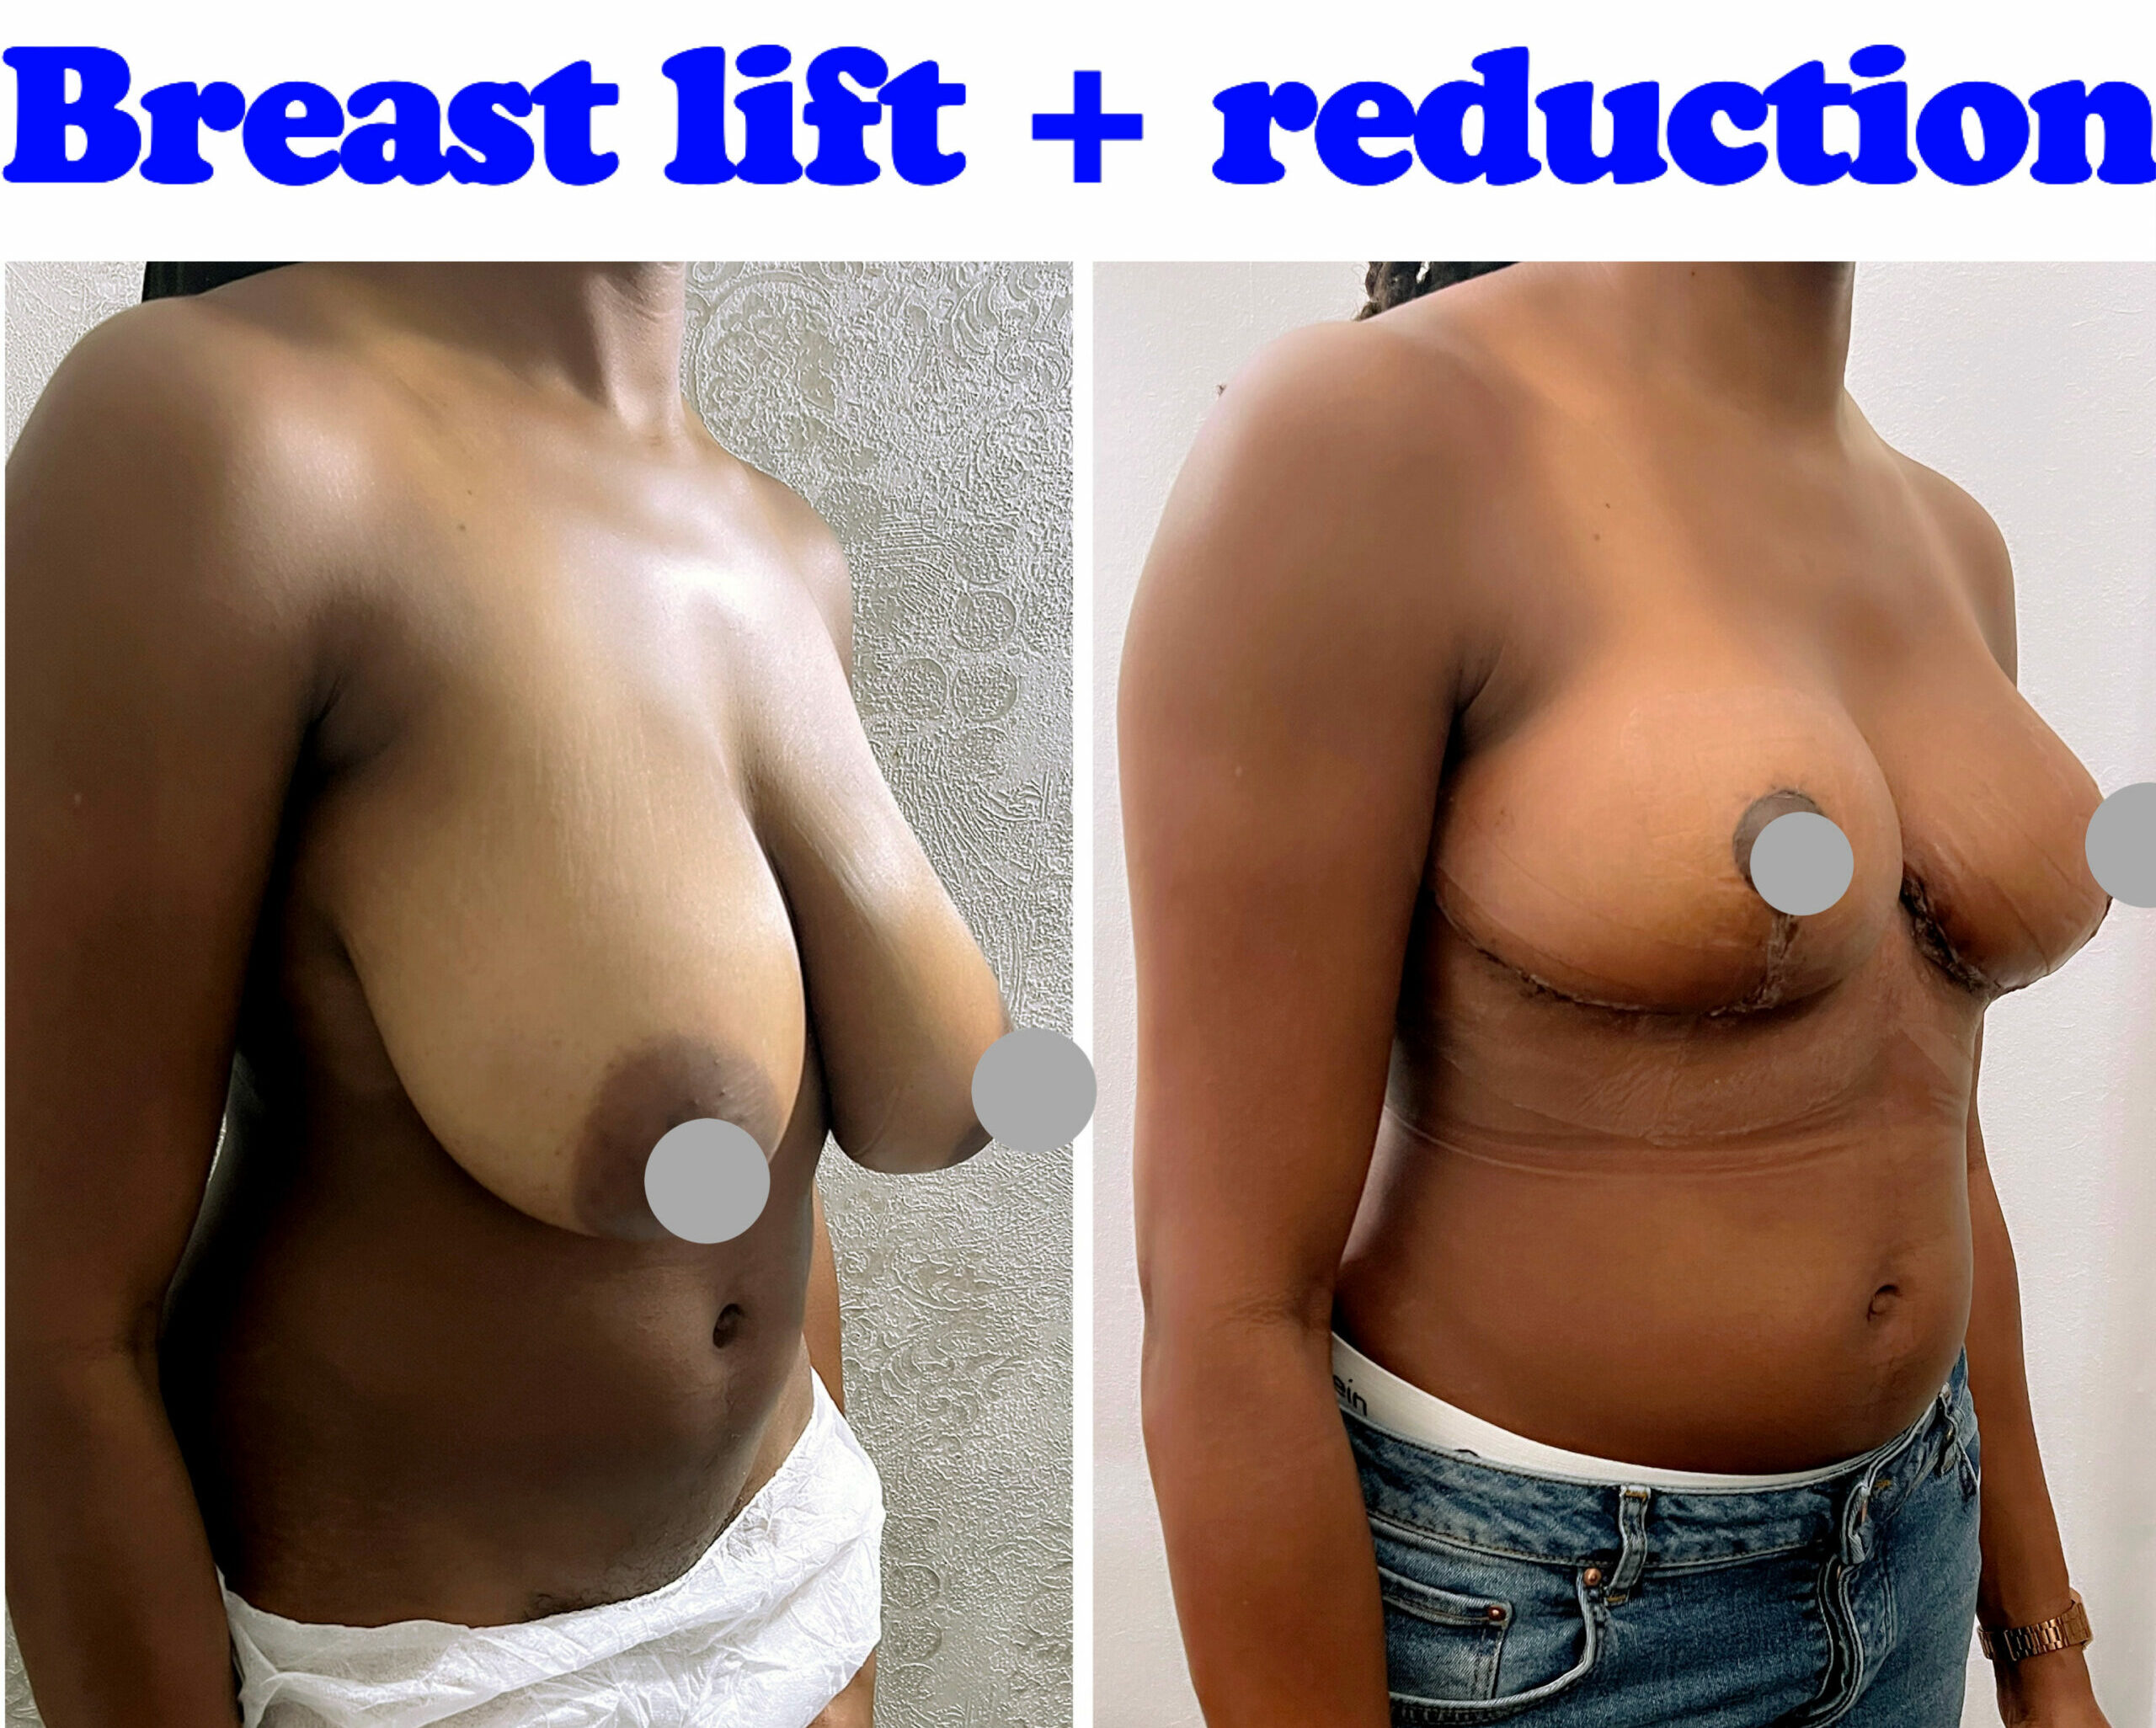 Breast lift and reduction before and after photos at Harley Clinic in London, UK